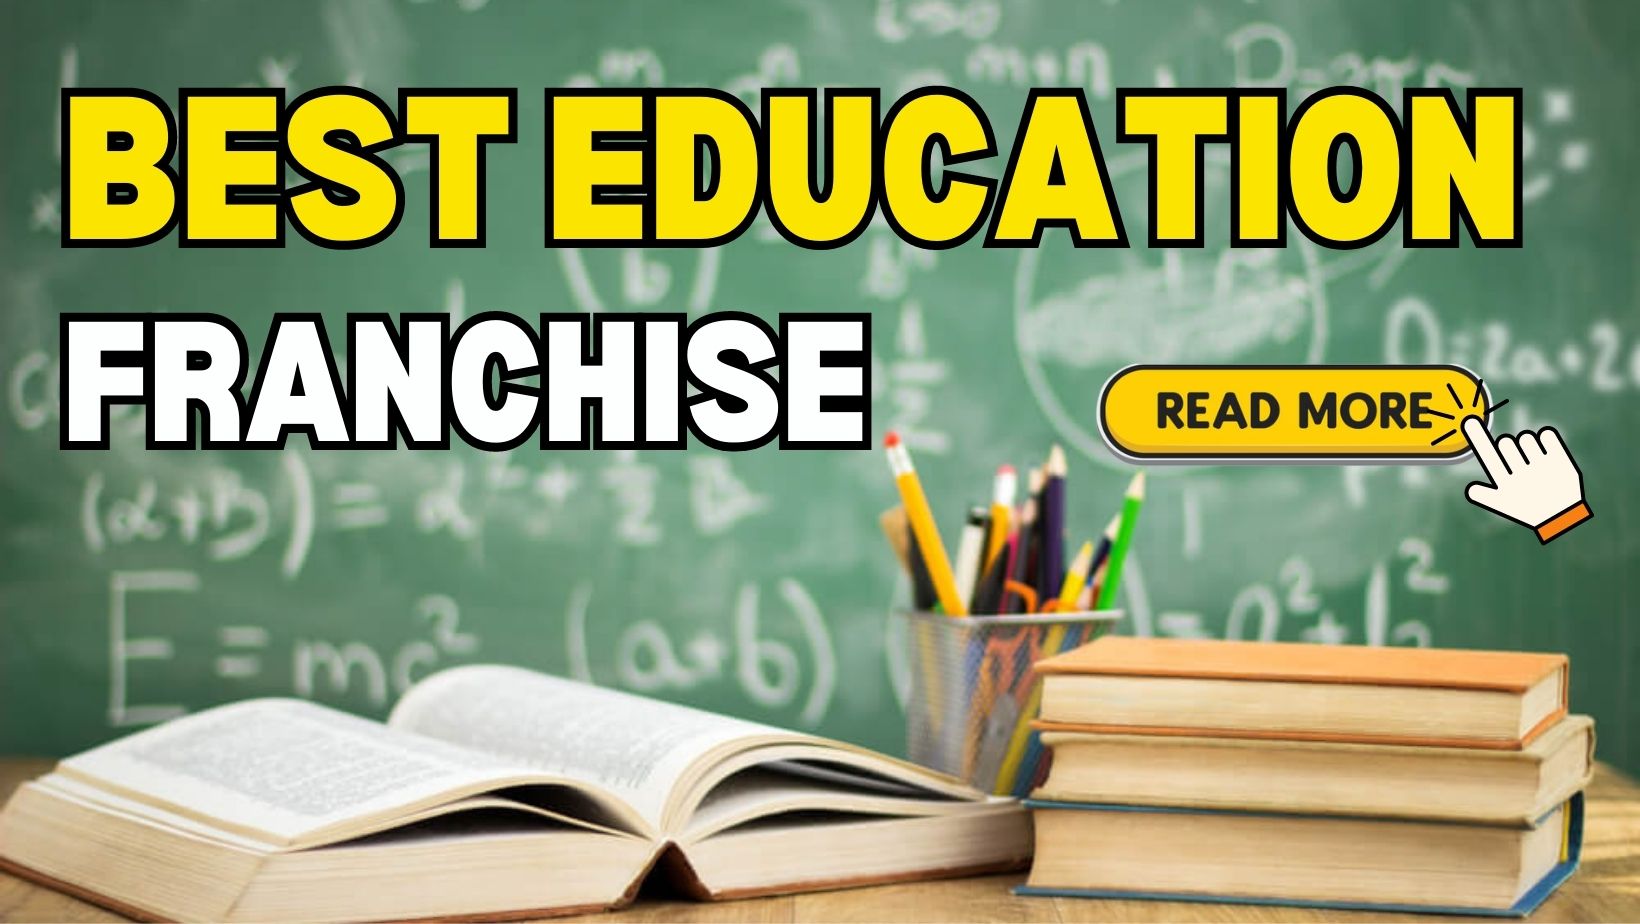 Best Education Franchise Opportunities in India